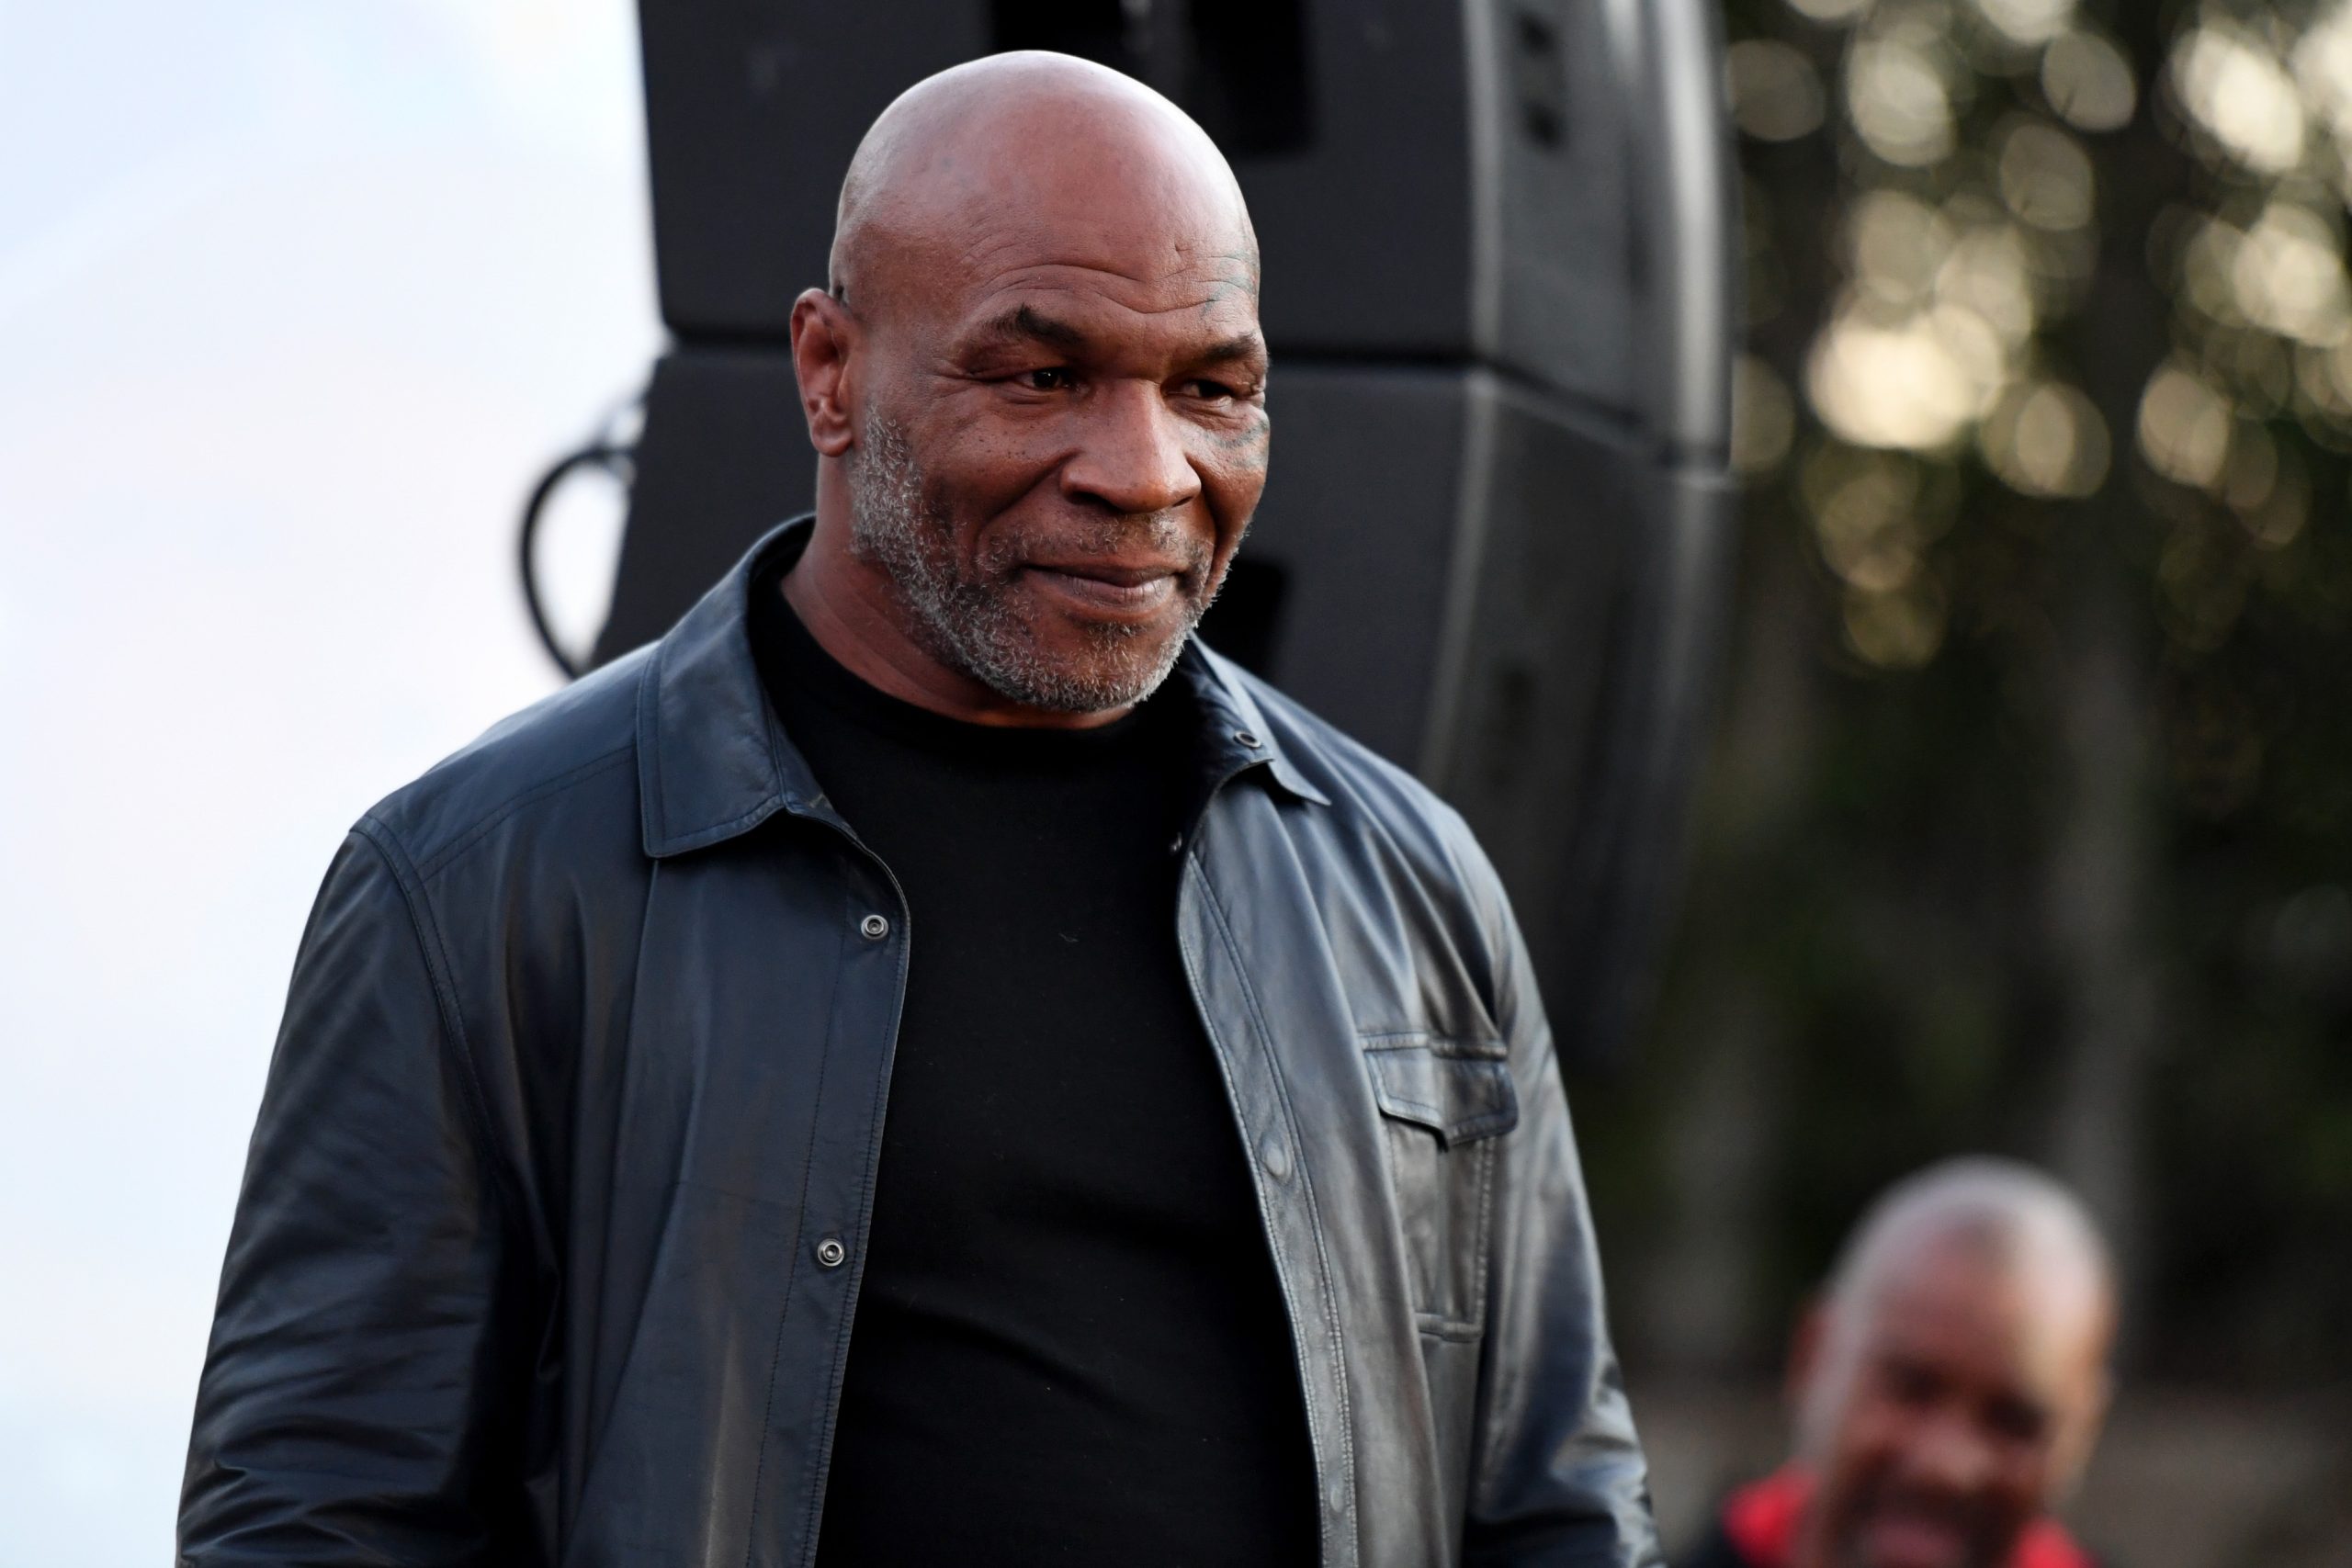 Mike Tyson Pummeled a Guy on a Plane but Offered a Warning 2 Years Ago